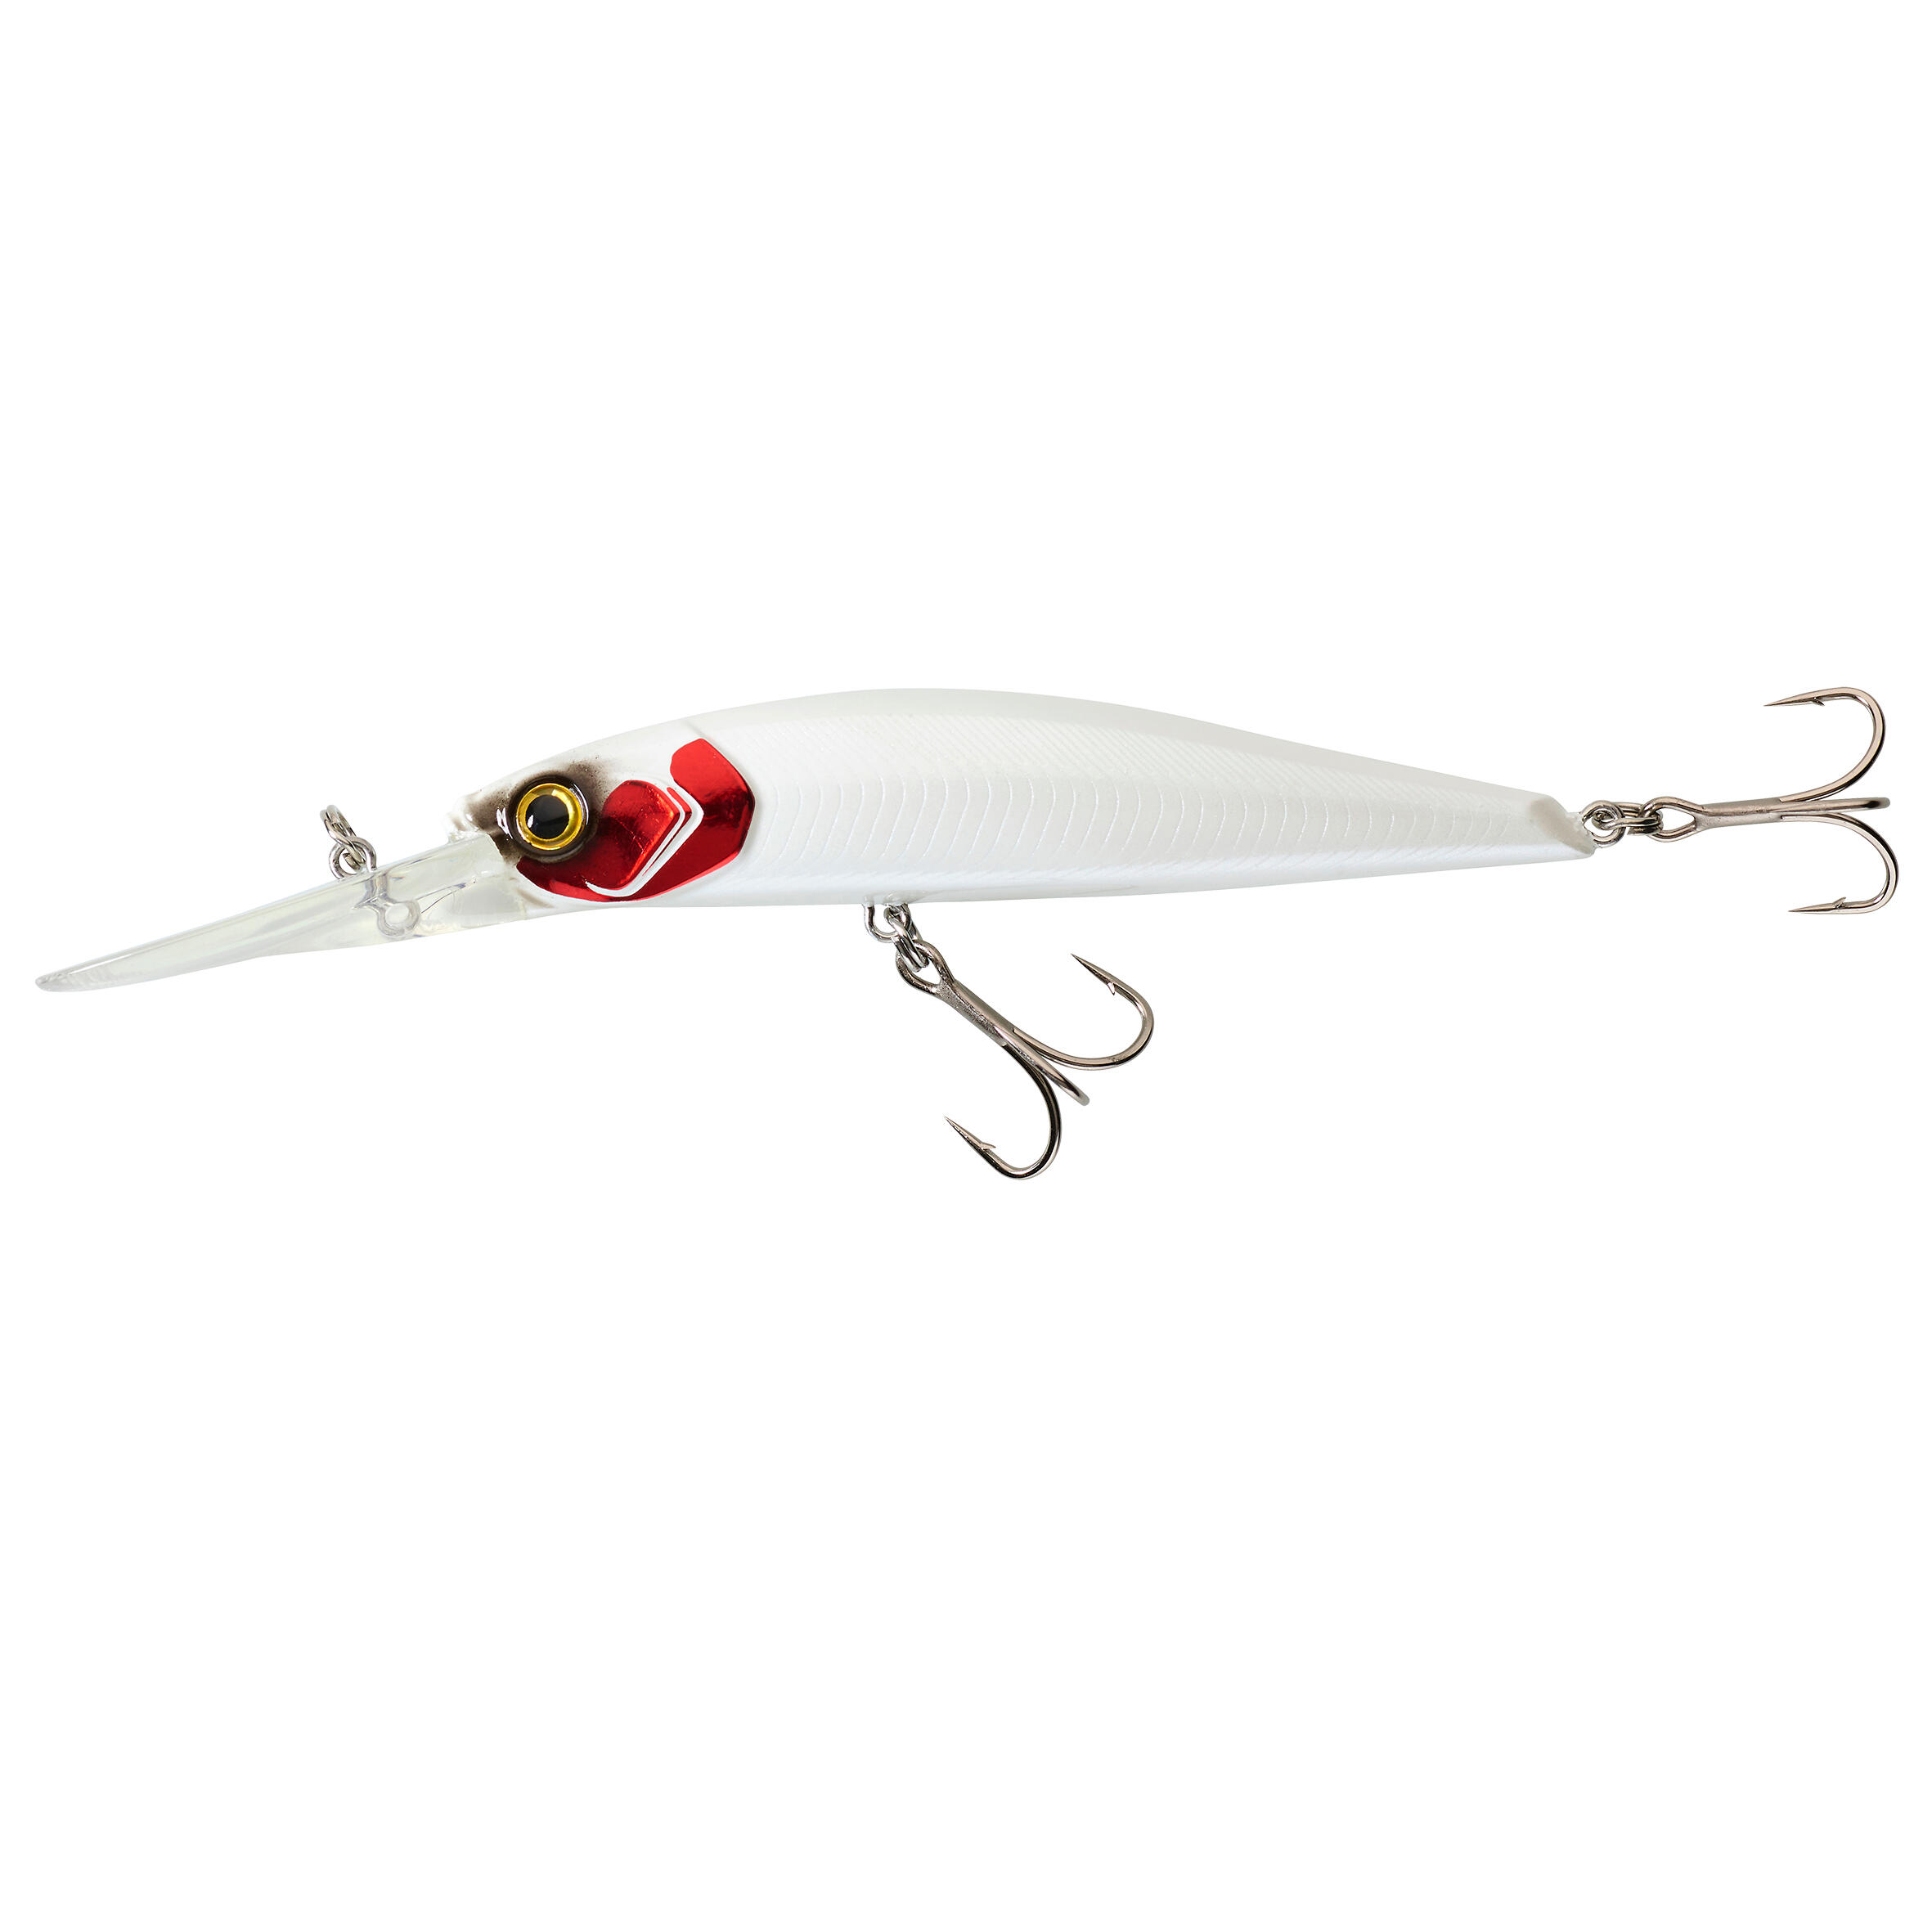 Fishing Hard Lure Towy 100F - Red Head - One Size By CAPERLAN | Decathlon